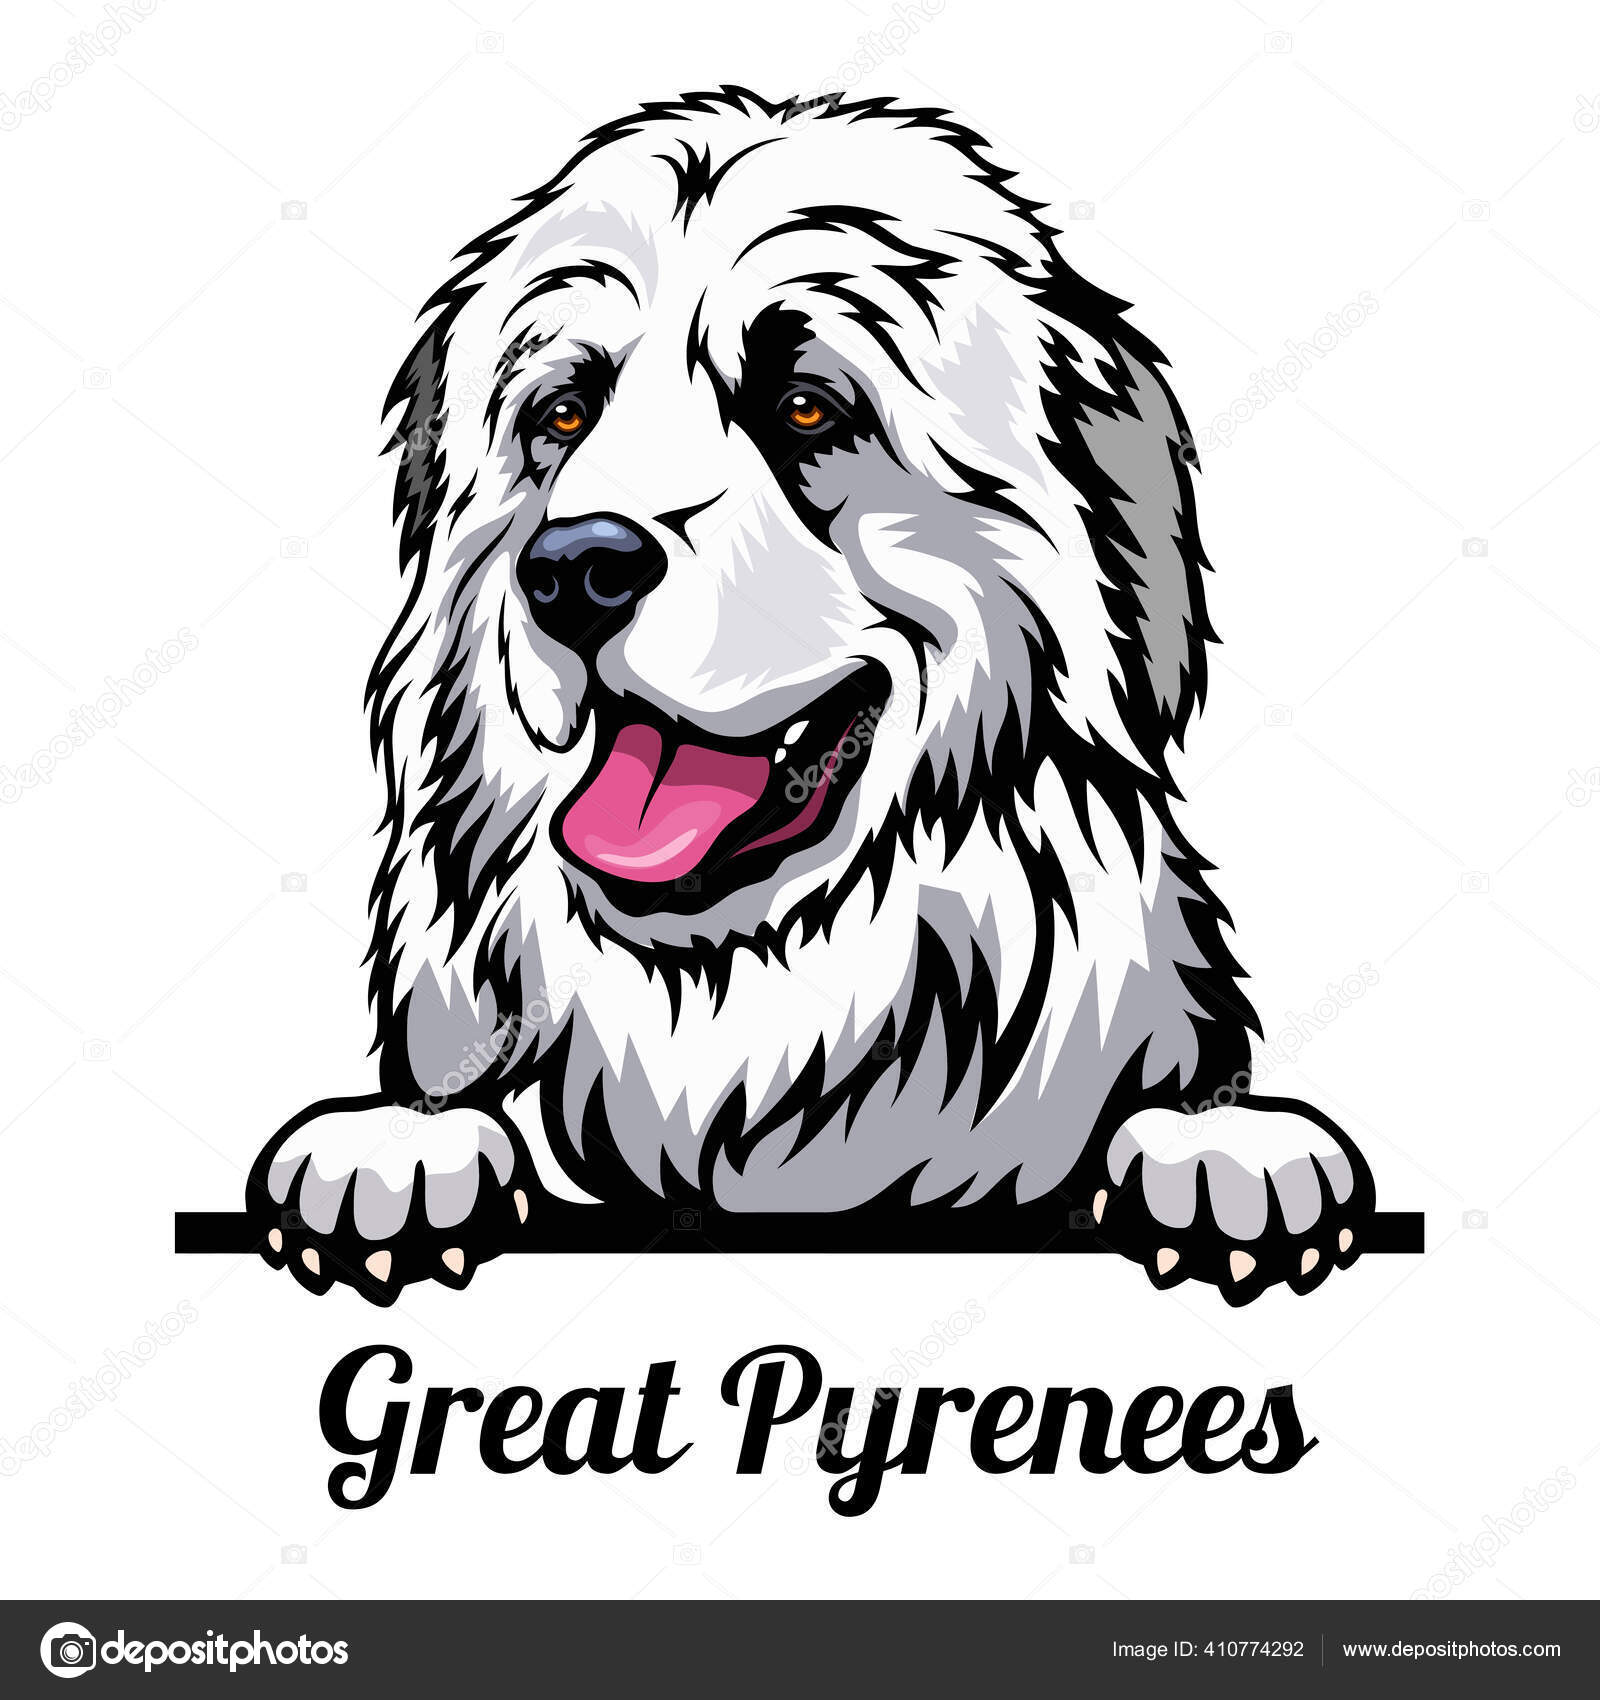 Head Great Pyrenees - dog breed. Color image of a dogs head isolated on